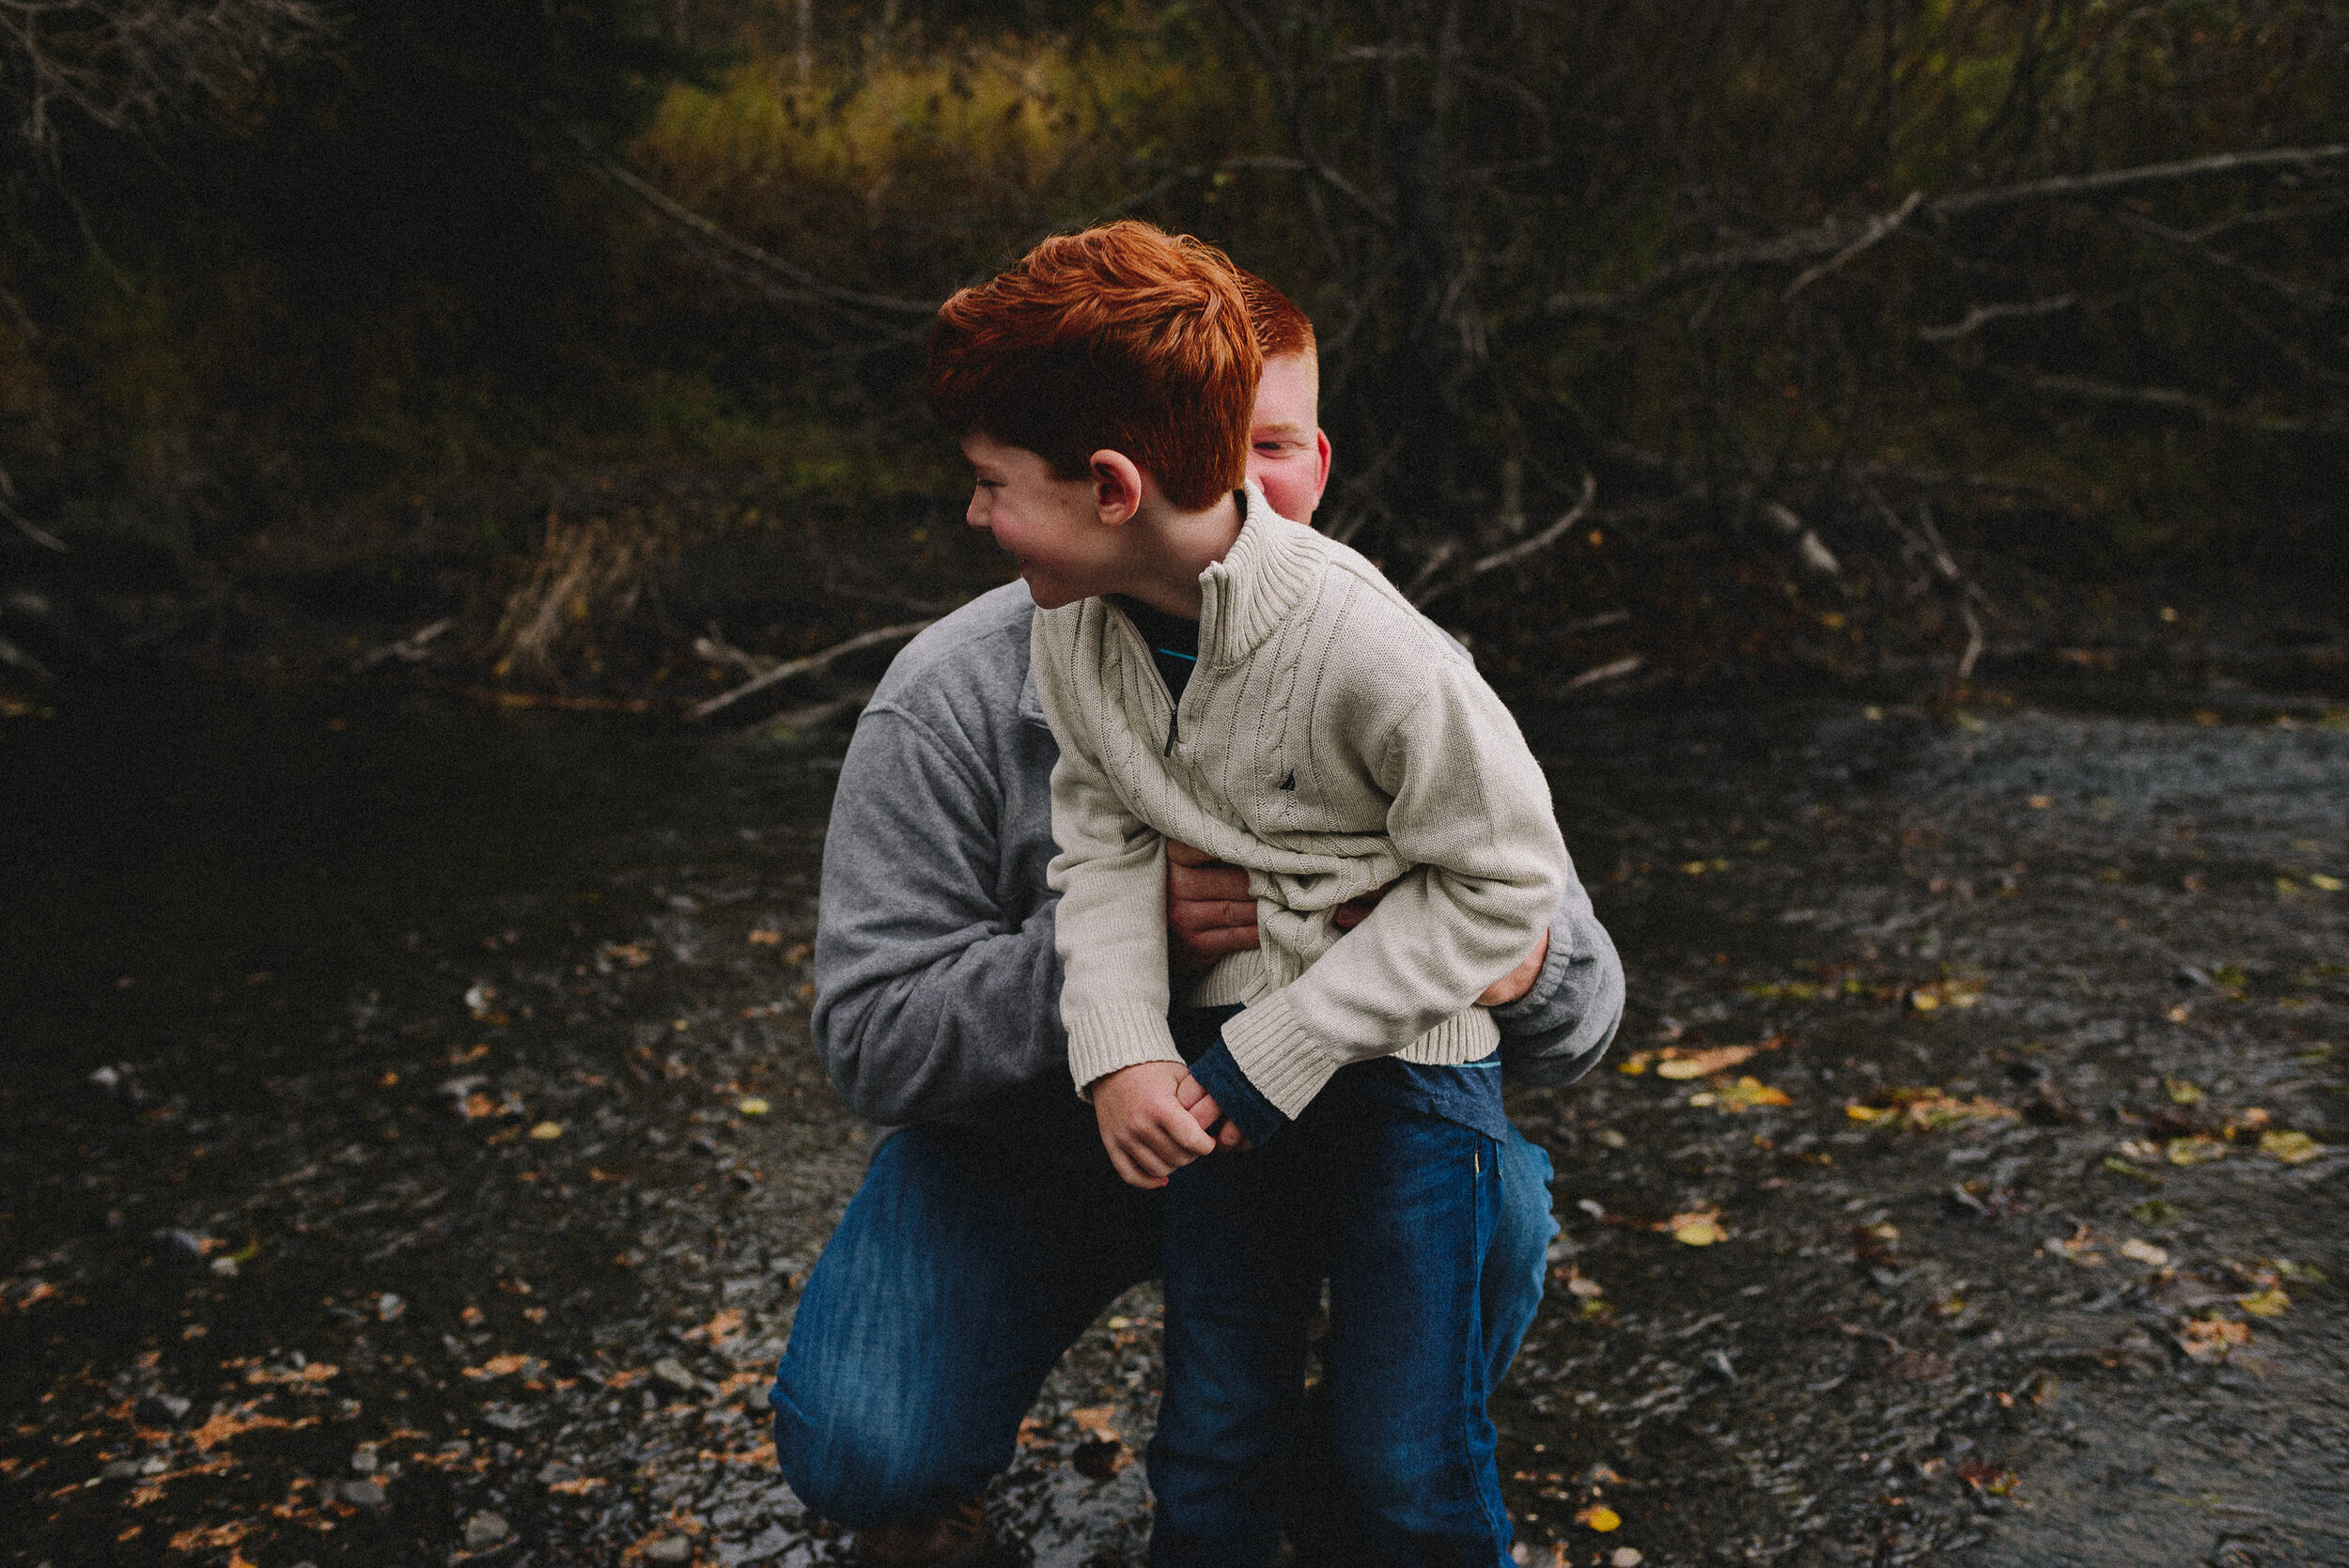 north-fork-eagle-river-fall-family-session-alaska-photographer-way-up-north-photography (41).jpg